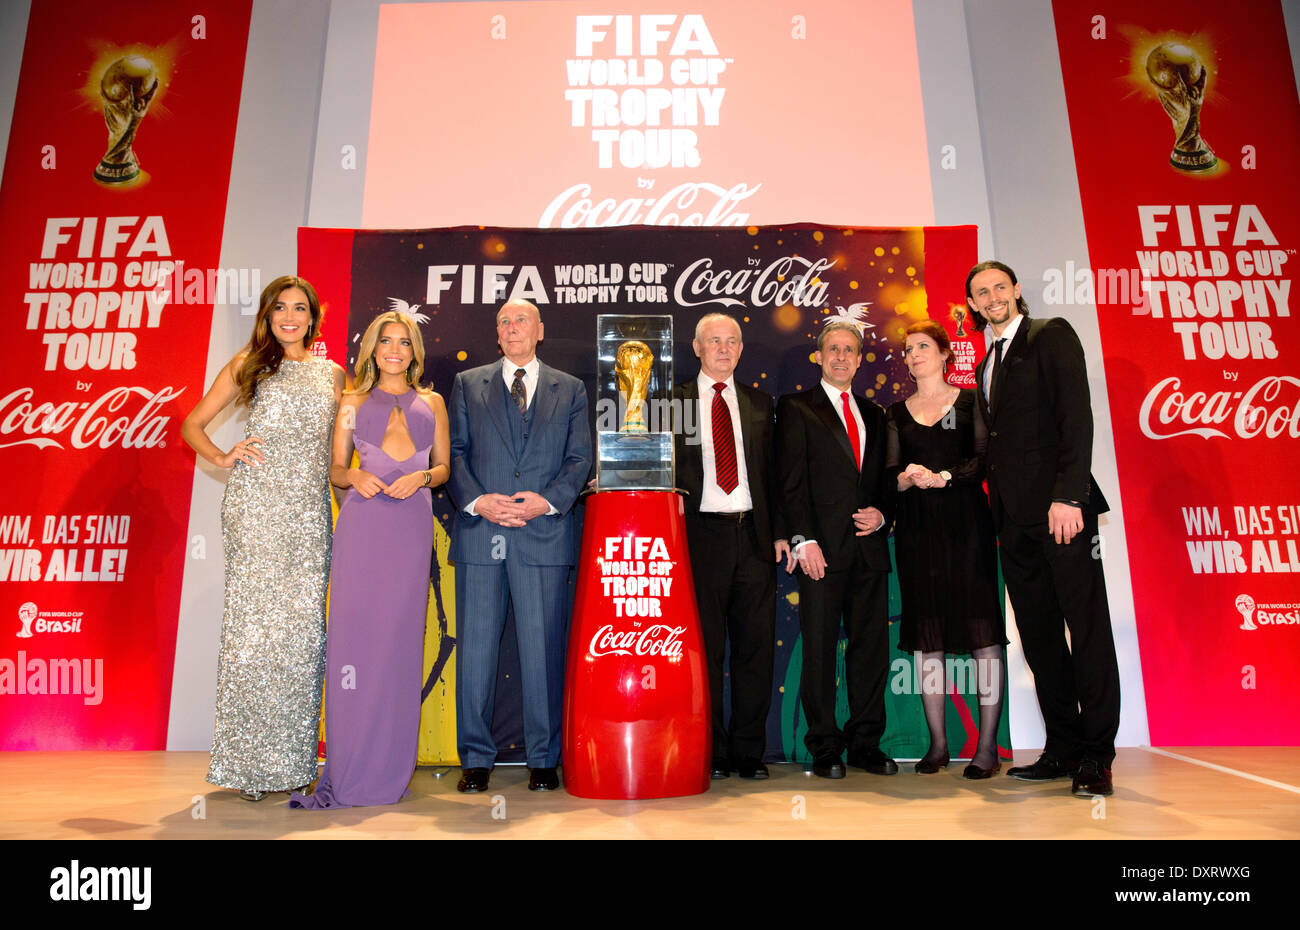 Presenter Jana Ina Zarella (L-R), model Sylvie Meis, former German national soccer players and world champions of 1954 Horst Eckel, Bernd Hoelzenbein of 1974 and Pierre Littbarski of 1990, sports presenter Monica Lierhaus and Borussia Dortmund's player Neven Subotic pose on stage with the original soccer world cup trophy during a gala which took place on the occasion of the FIFA world cup tour in Berlin, Germany, 29 March 2014. The FIFA World CUp trophy is touring across the glob through 90 countries in preparation for the forthcoming soccer world cup in Brazil. Photo: Kay Nietfeld/dpa Stock Photo